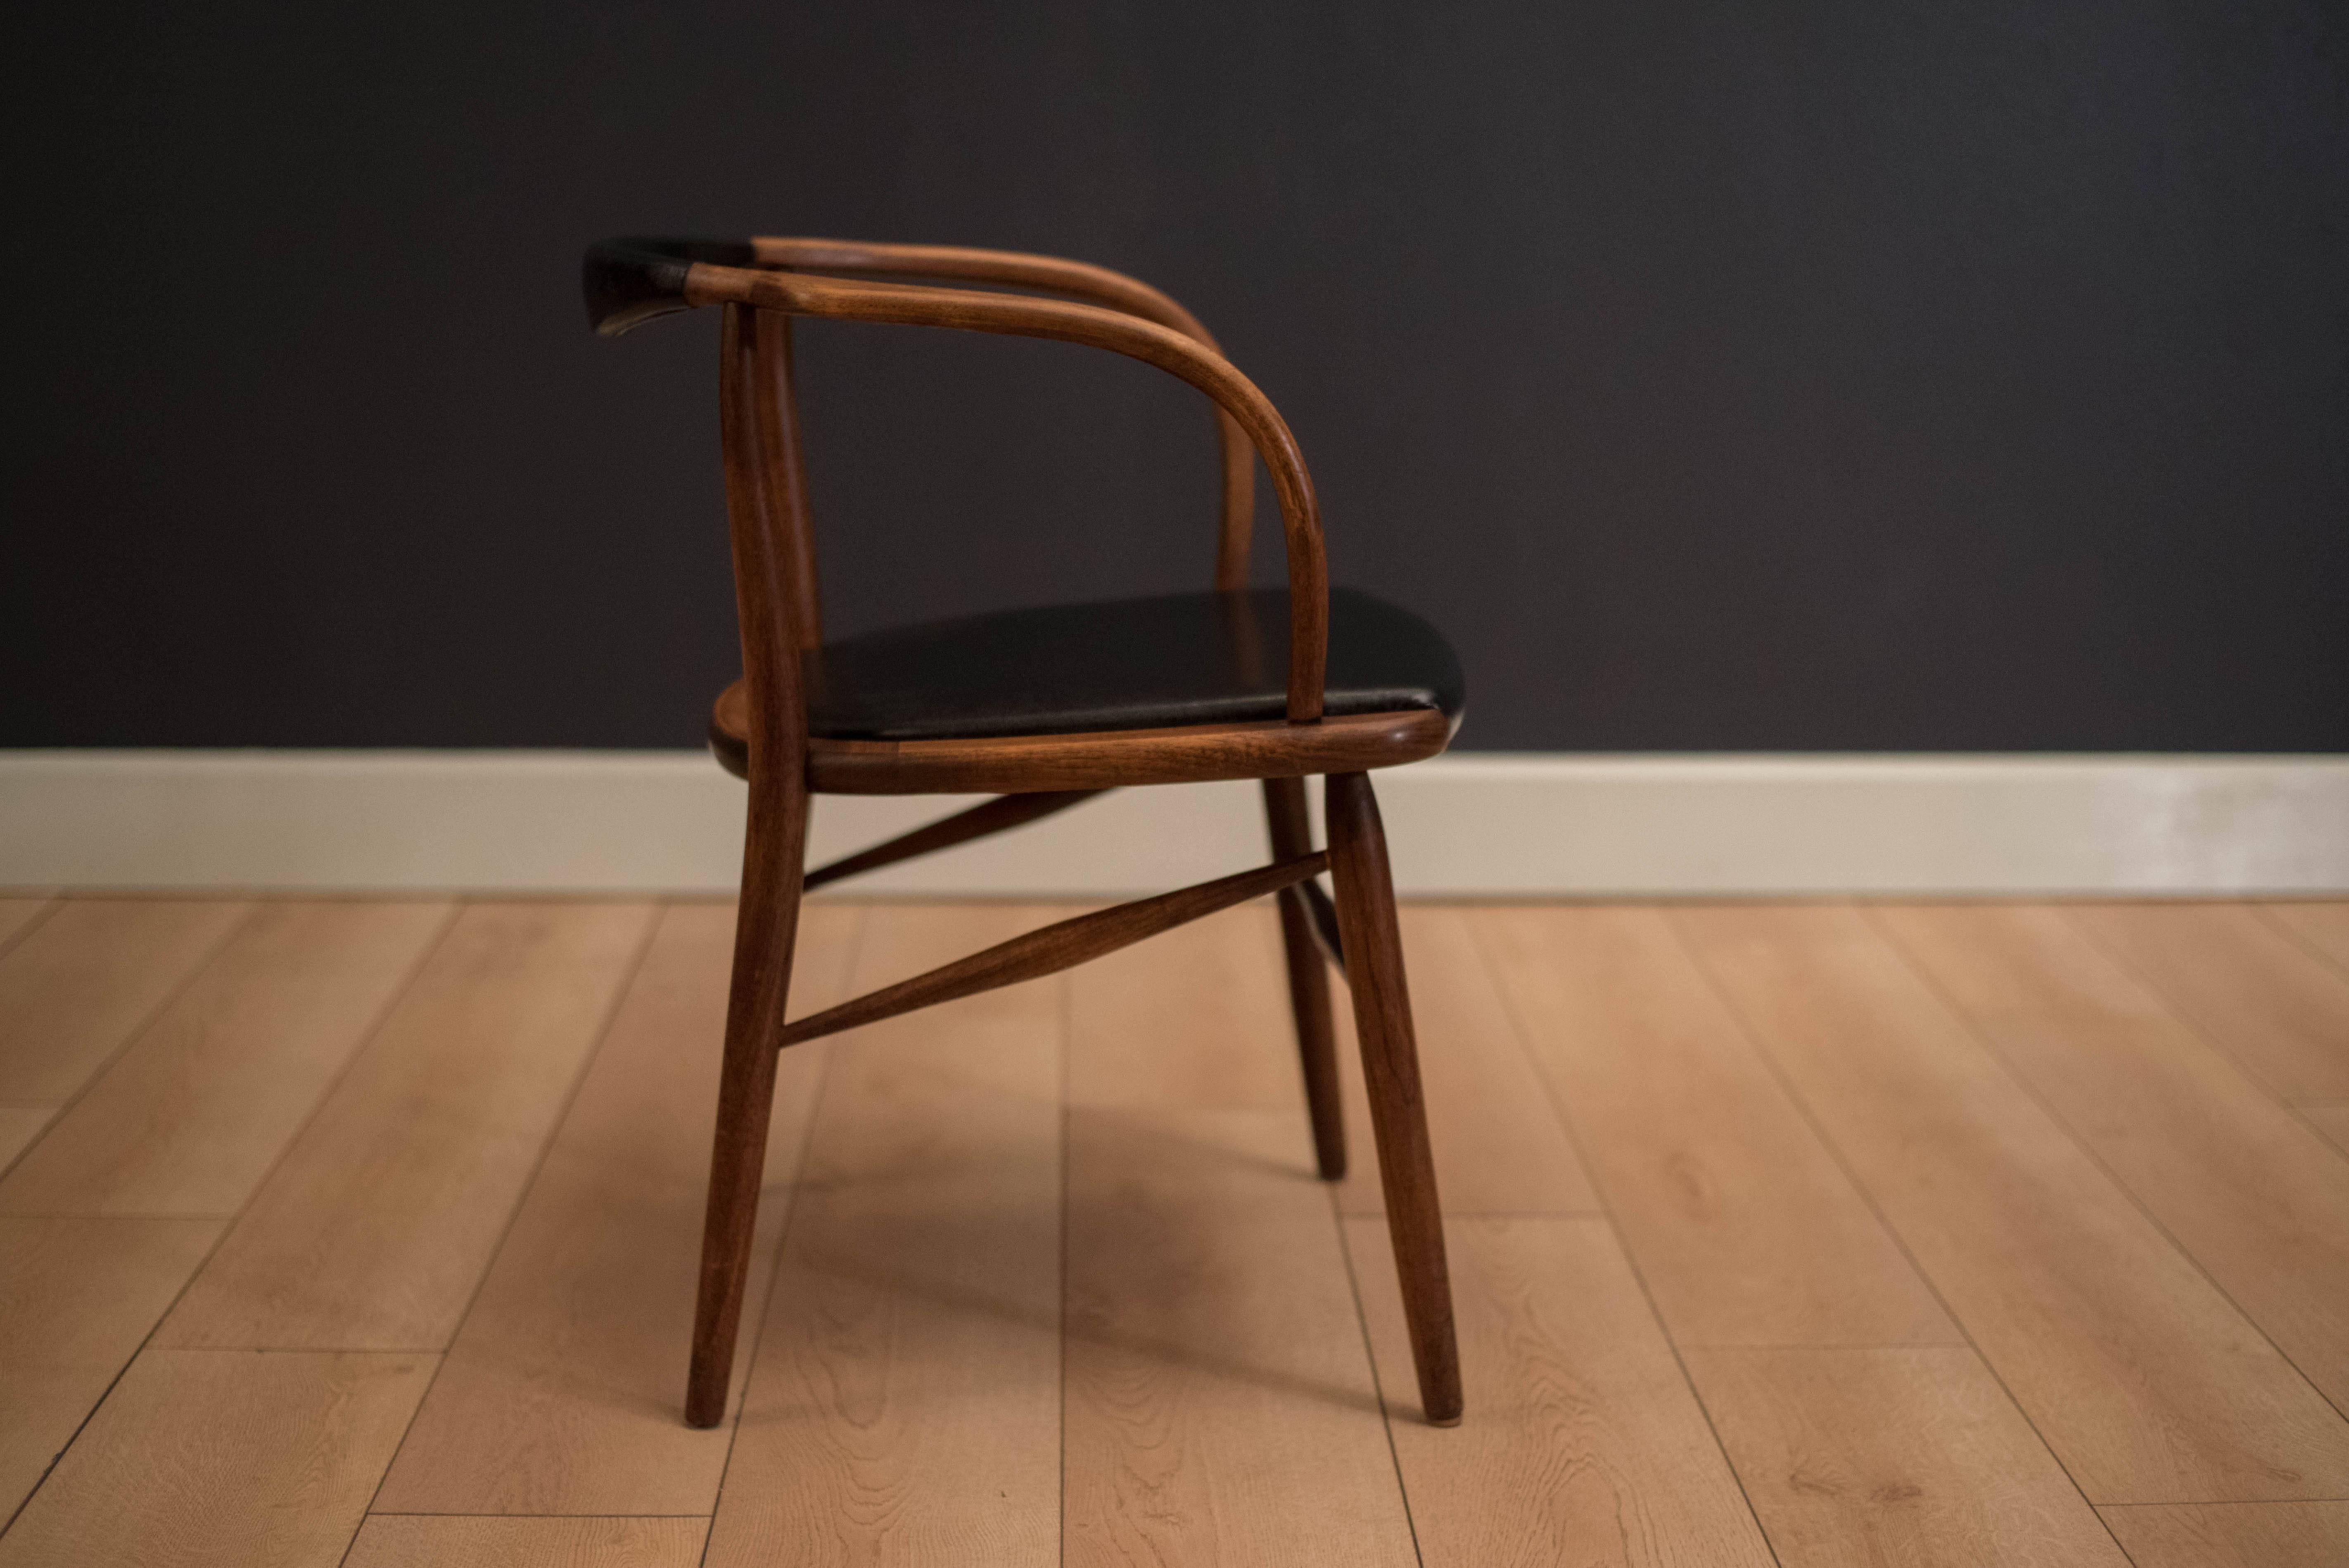 Mid-Century single armchair in walnut, circa 1950s. This piece features unique curved walnut arms and original black Naugahyde upholstery.